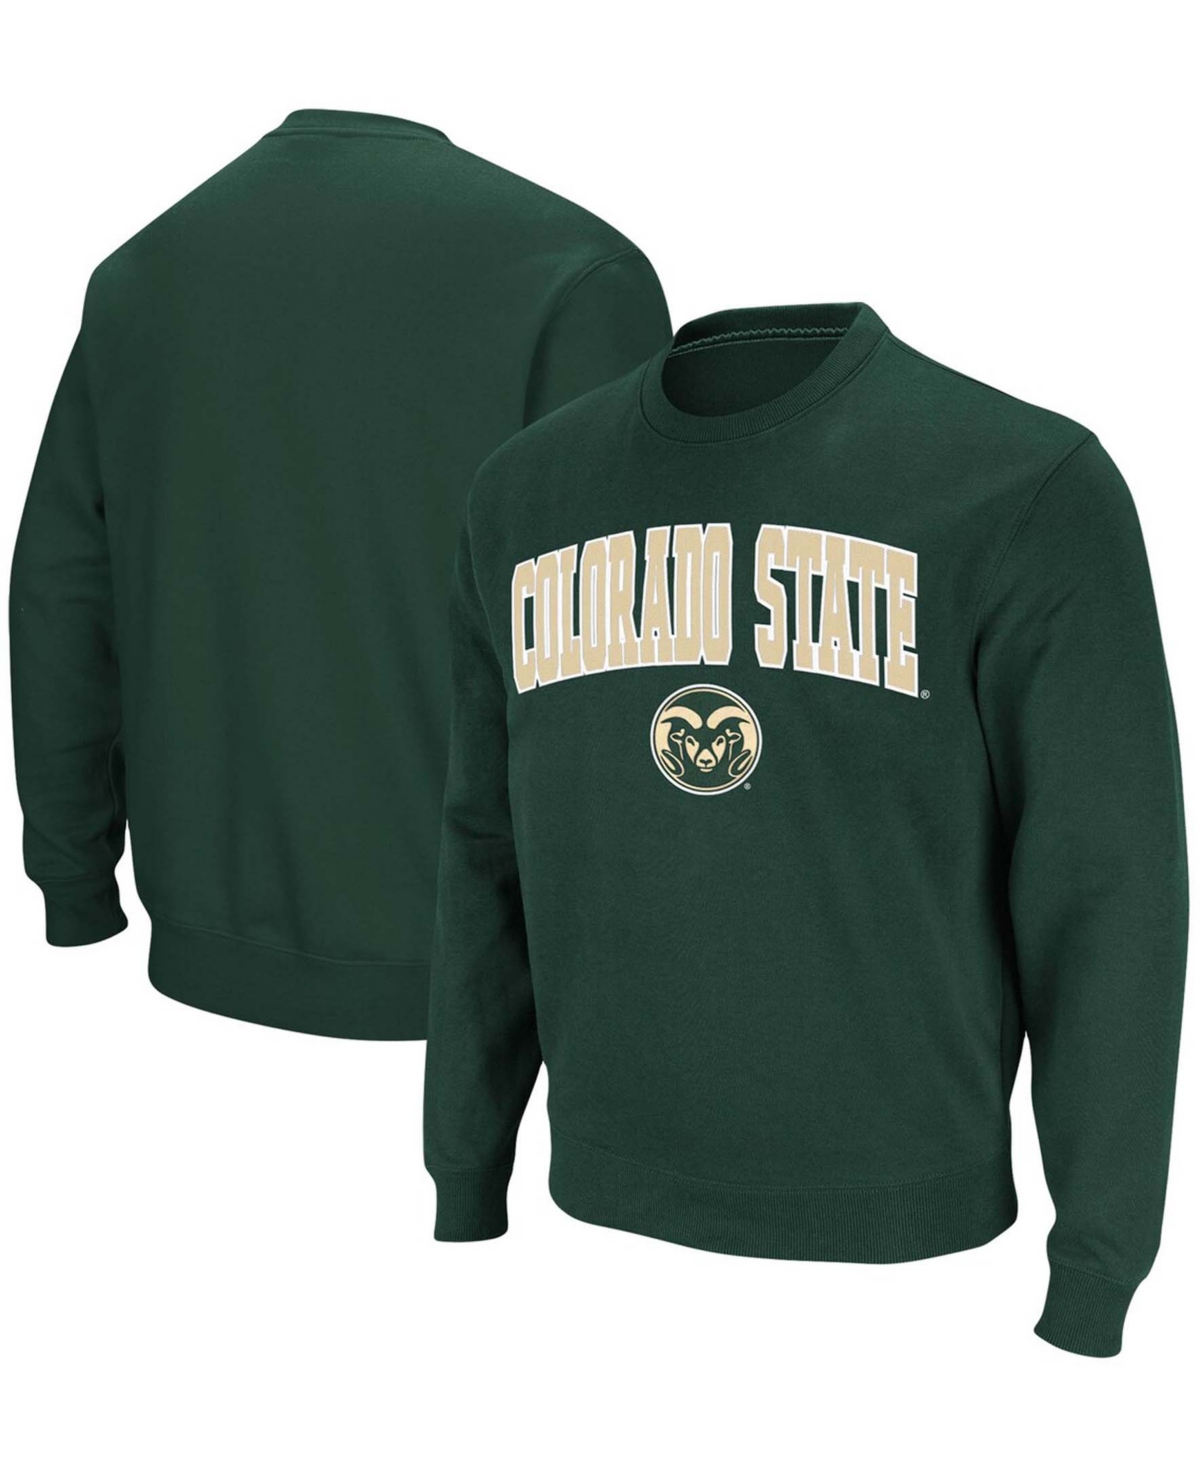 Men's Big and Tall Green Colorado State Rams Arch Logo Tackle Twill Pullover Sweatshirt - Green